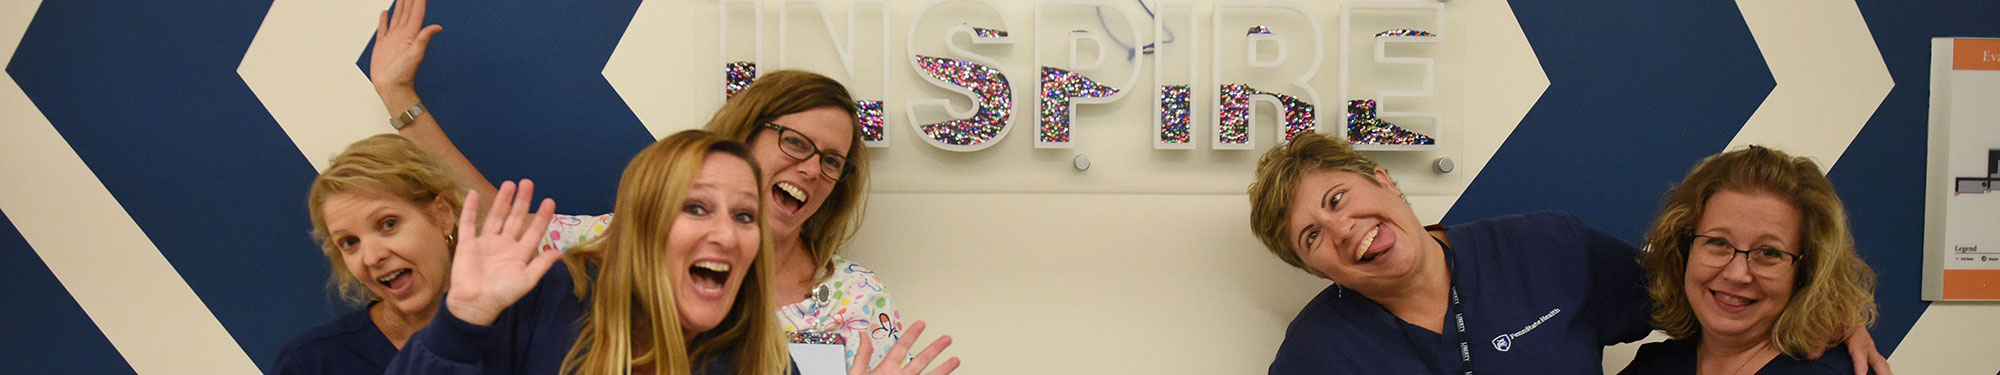 A group of nurses are seen in the Survivorship Clinic at Penn State Children's Hospital. They are making silly faces and gesturing to a large depiction of the word INSPIRE on the wall behind them.